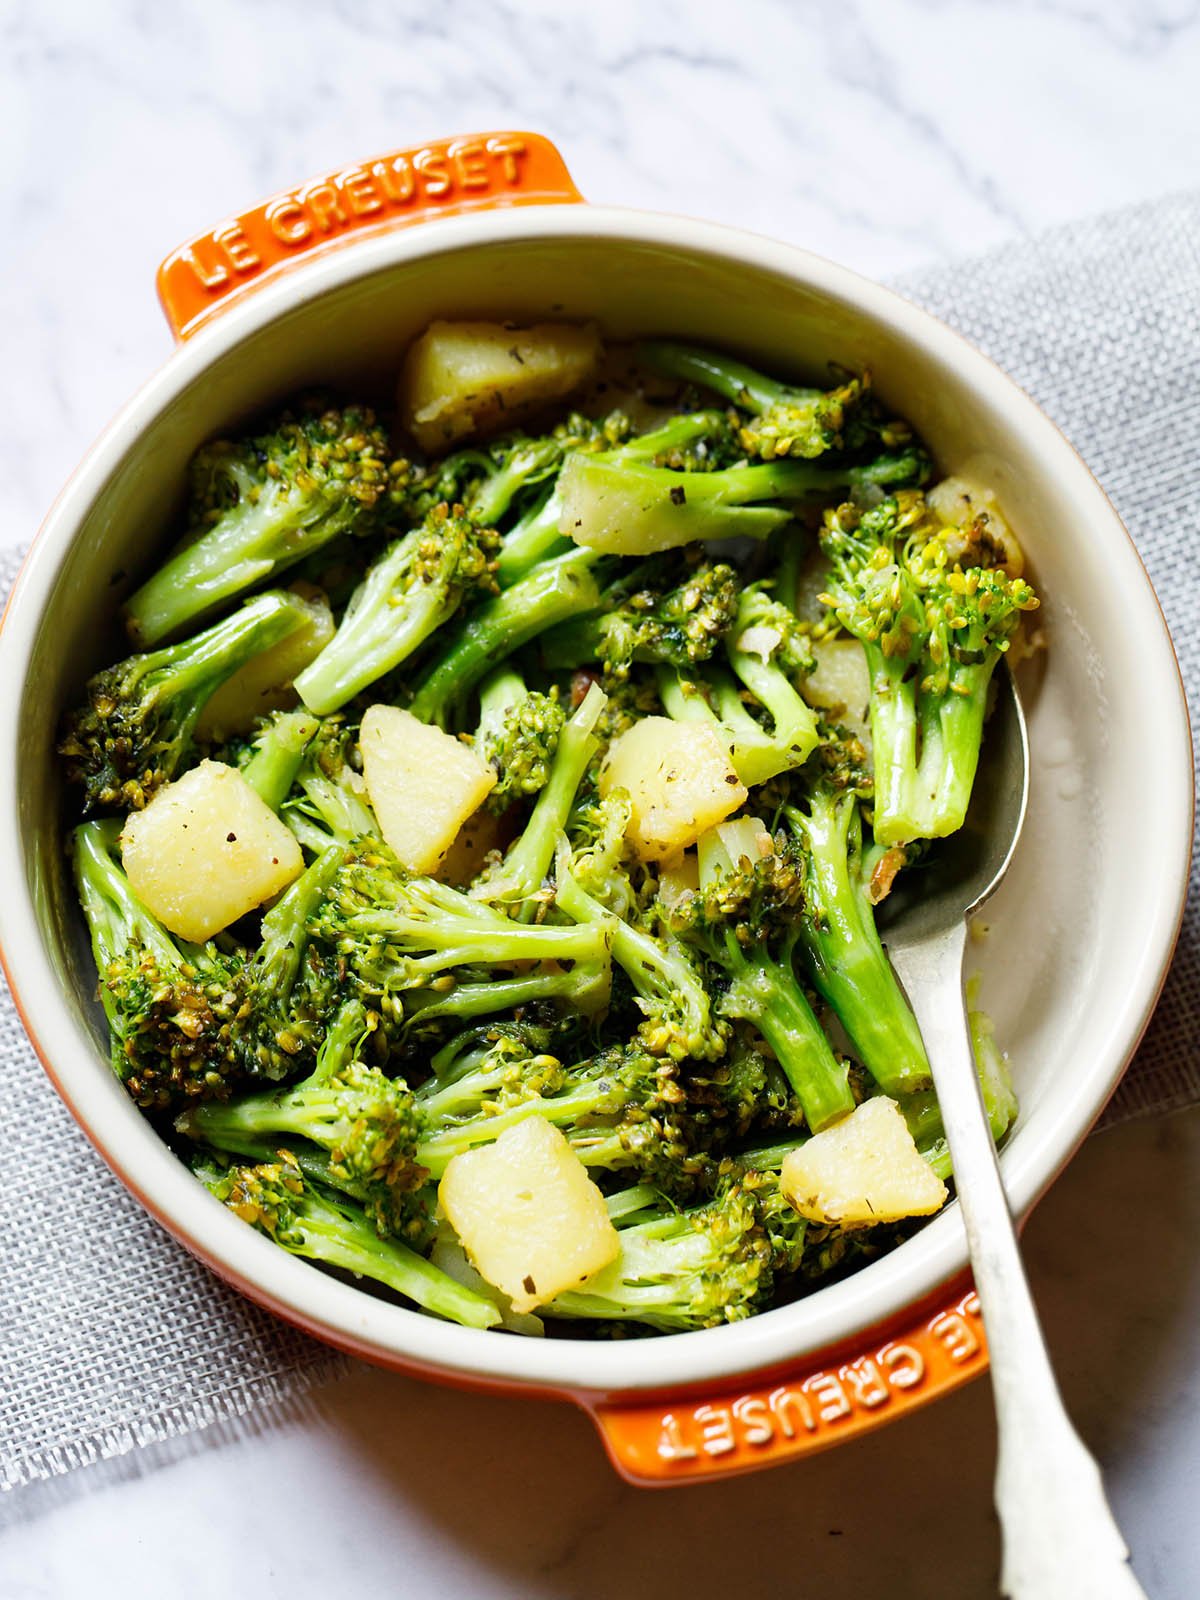 sauteed broccoli in a le creuset cream ceramic pan with orange handles with a spoon inside placed on a folded light gray jute fabric